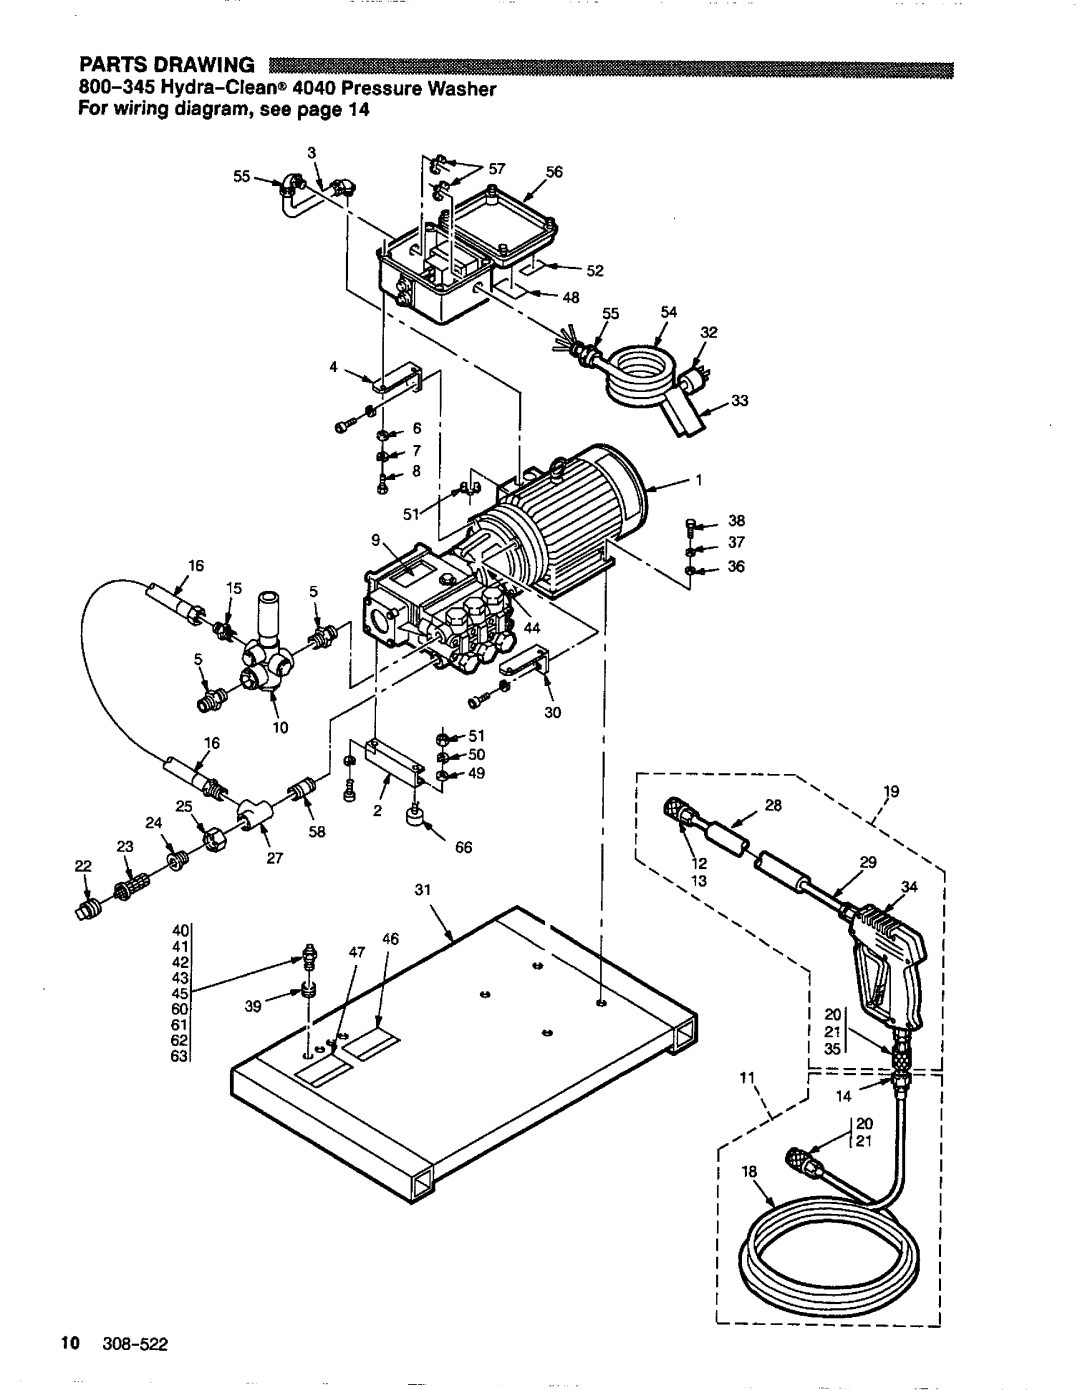 Graco Inc 800-345 manual Parts Drawing, Hvdra-Clean@4040 Pressure Washer, For wiring diagram, see page14, 10308-522 